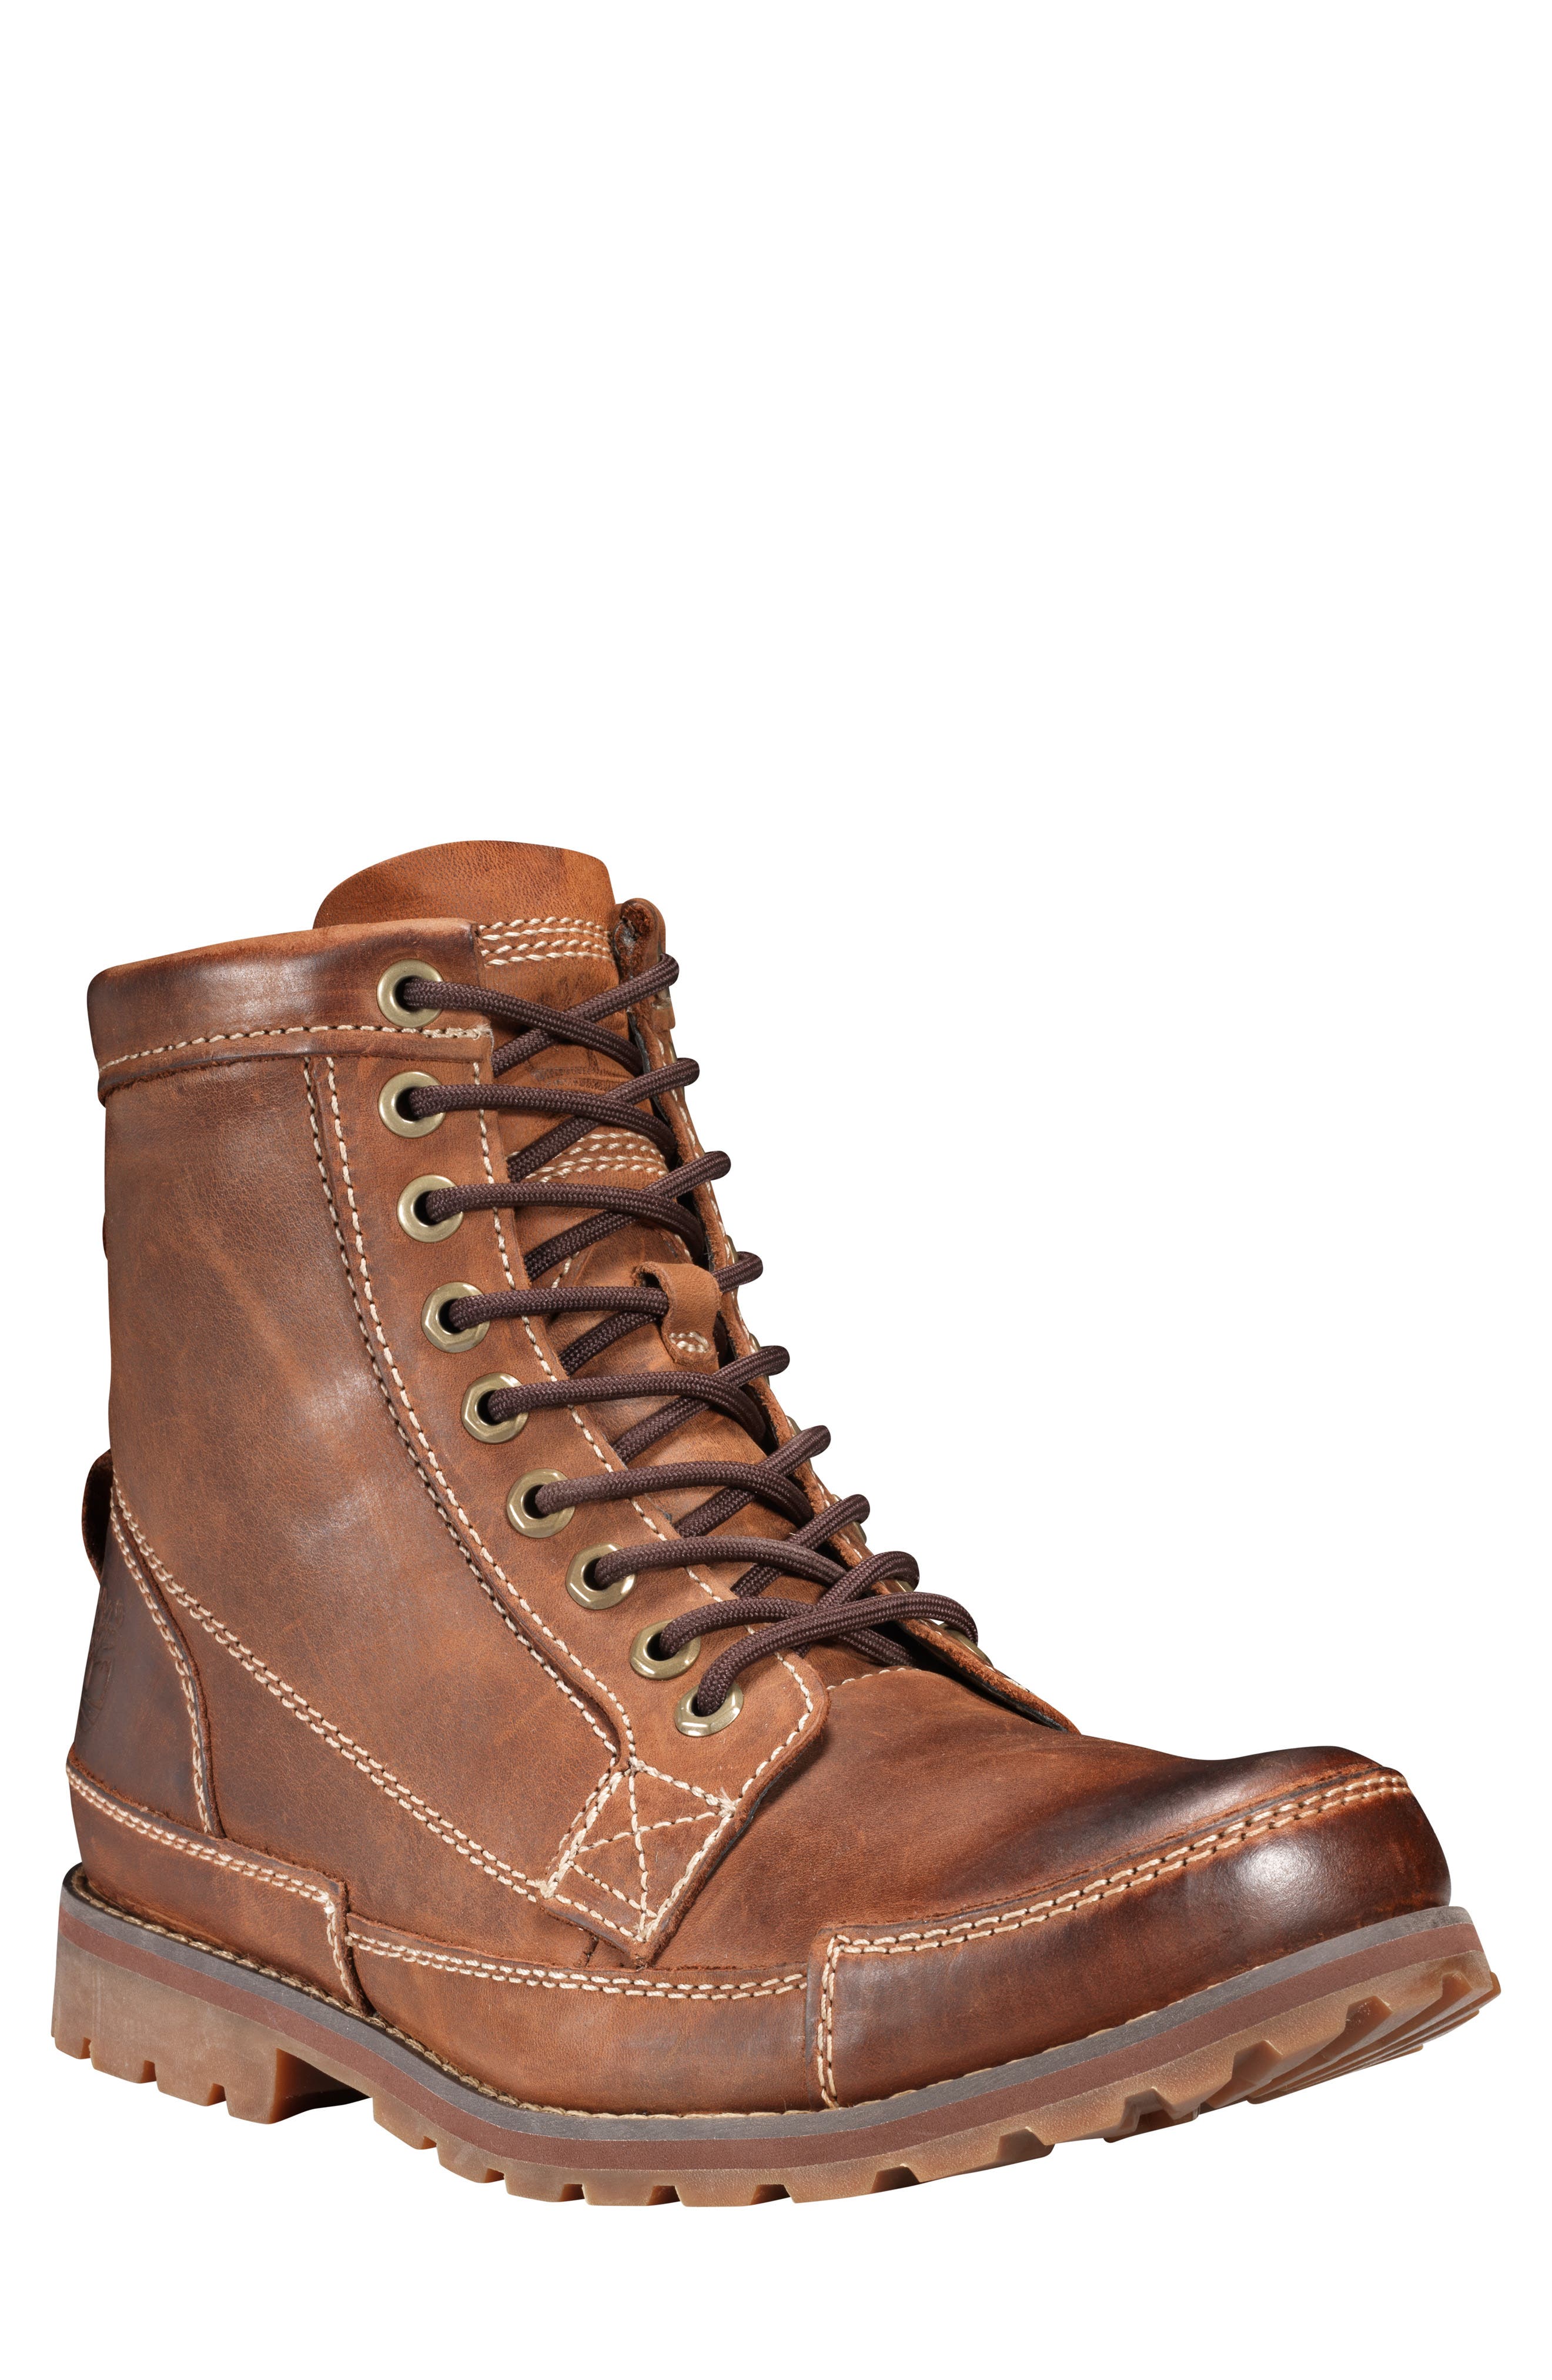 mens rugged casual boots